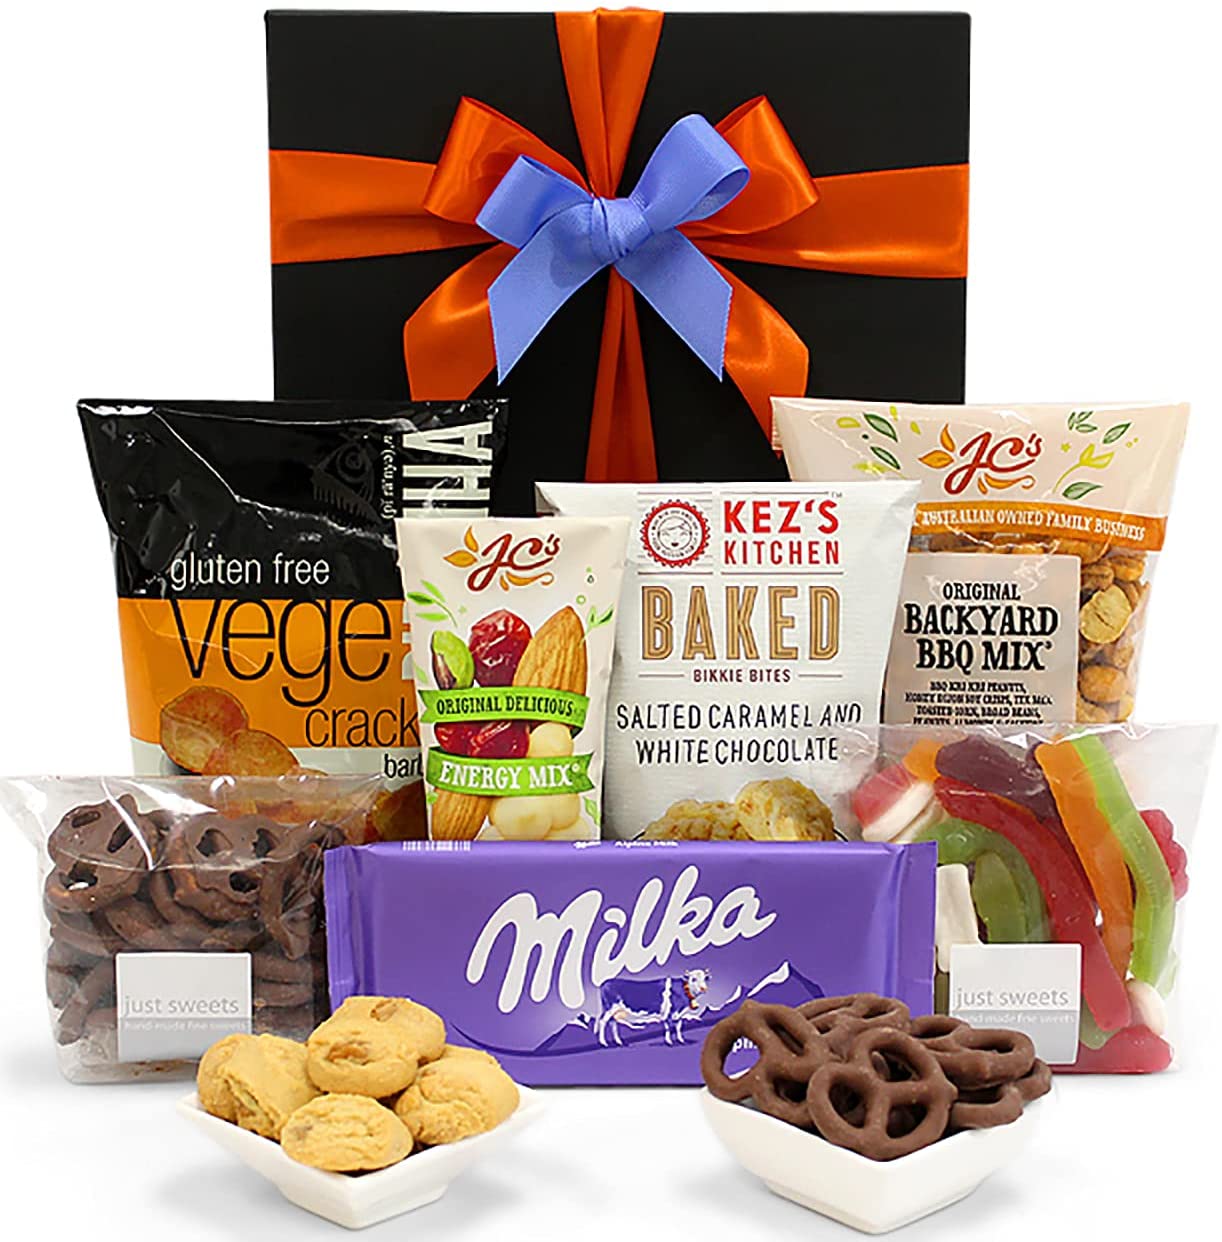 Snack Lover Gift Hamper with Vege Crackers, Choc Pretzels, White Choc Bites, Nut Mix and Snakes - Sweet & Savoury Hamper for Birthdays, Christmas, Easter, Weddings, Anniversaries, Office Parties Deals499